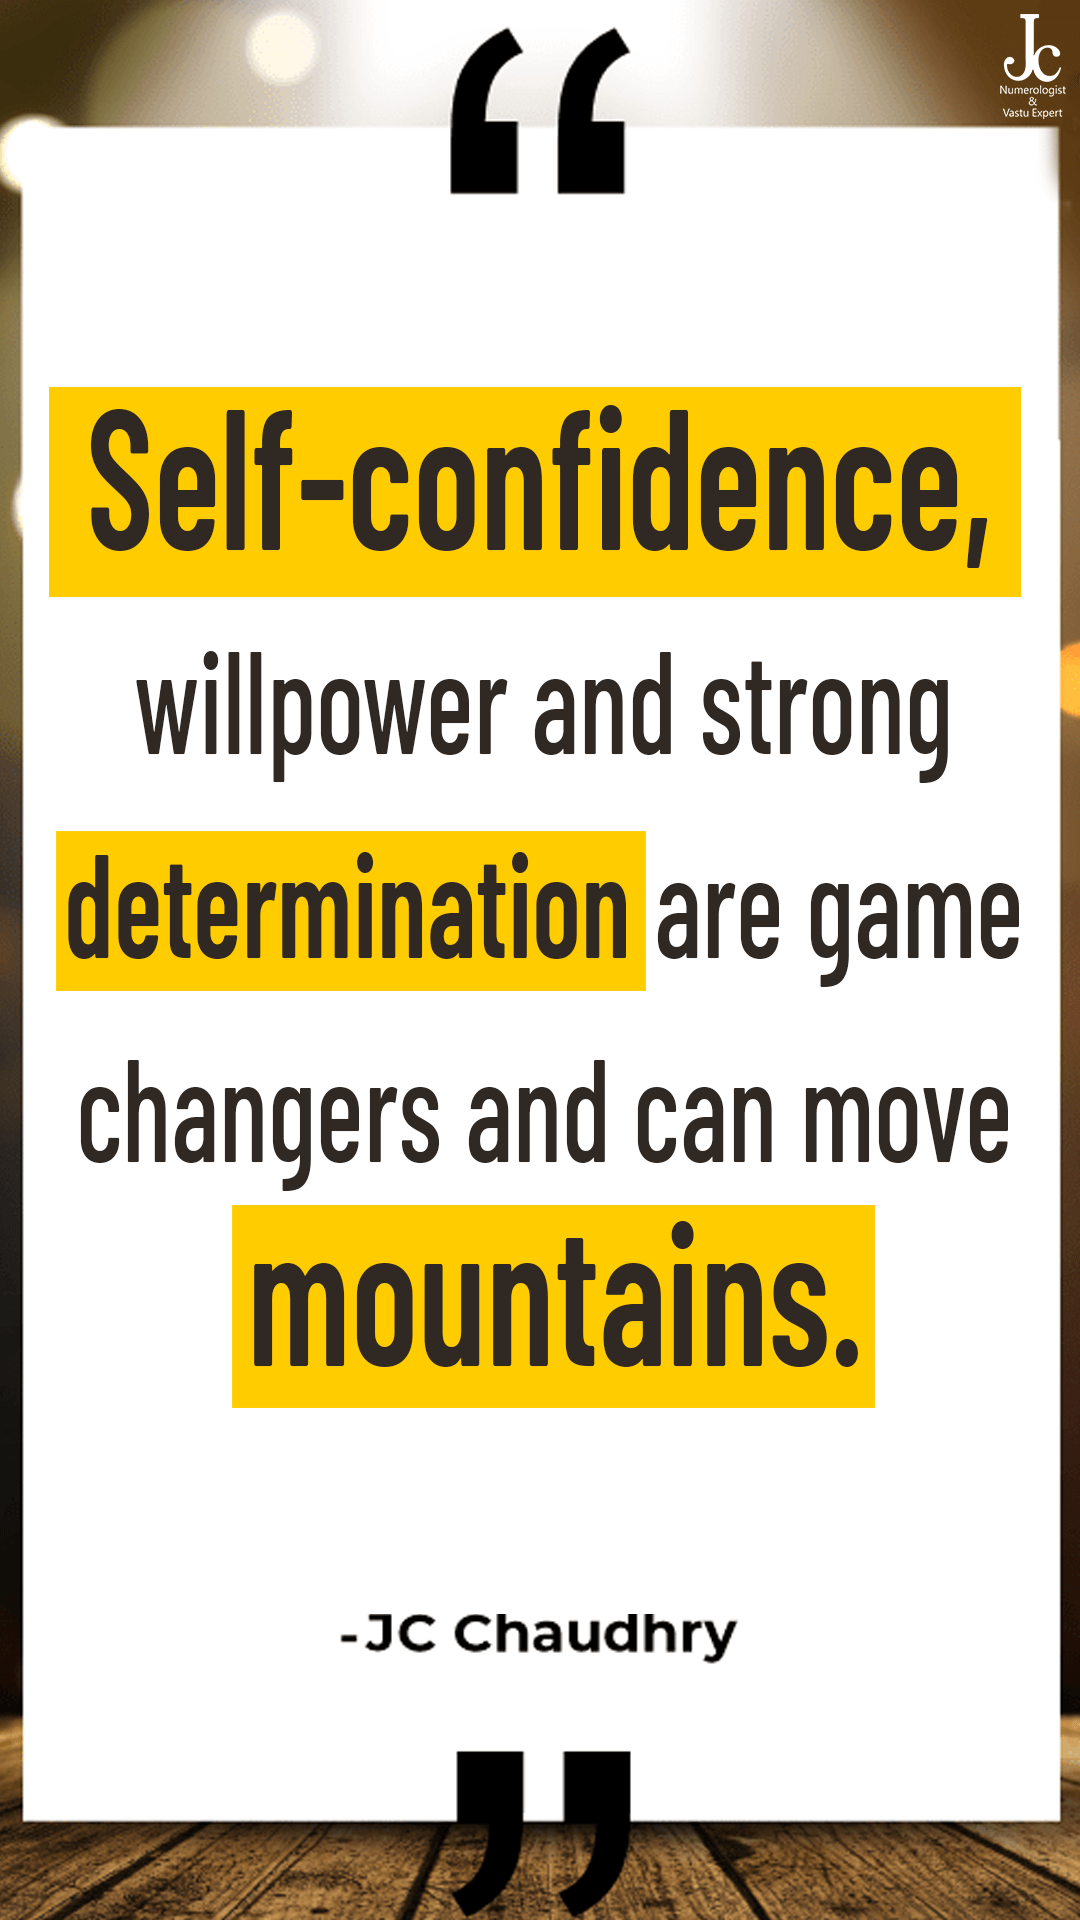 “Self-confidence, will power and strong determination are game changers and can move mountains.”